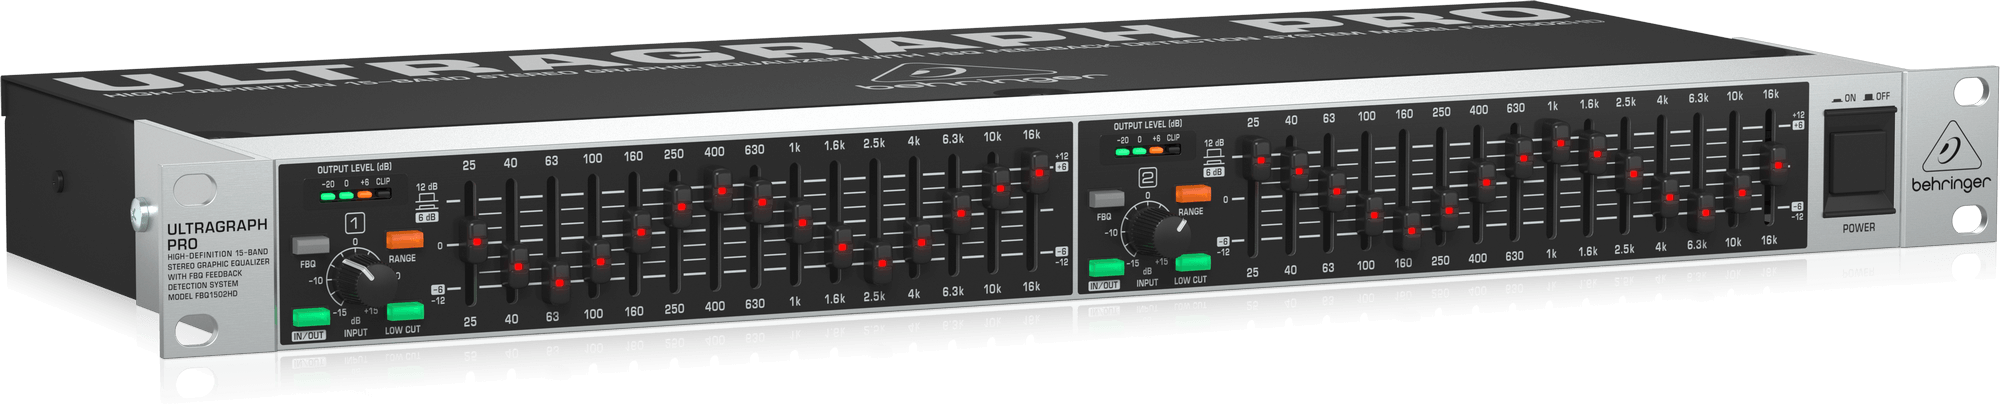 Behringer Ultragraph Pro FBQ1502HD High-Definition 15-Band Stereo Graphic Equalizer with FBQ Feedback Detection System